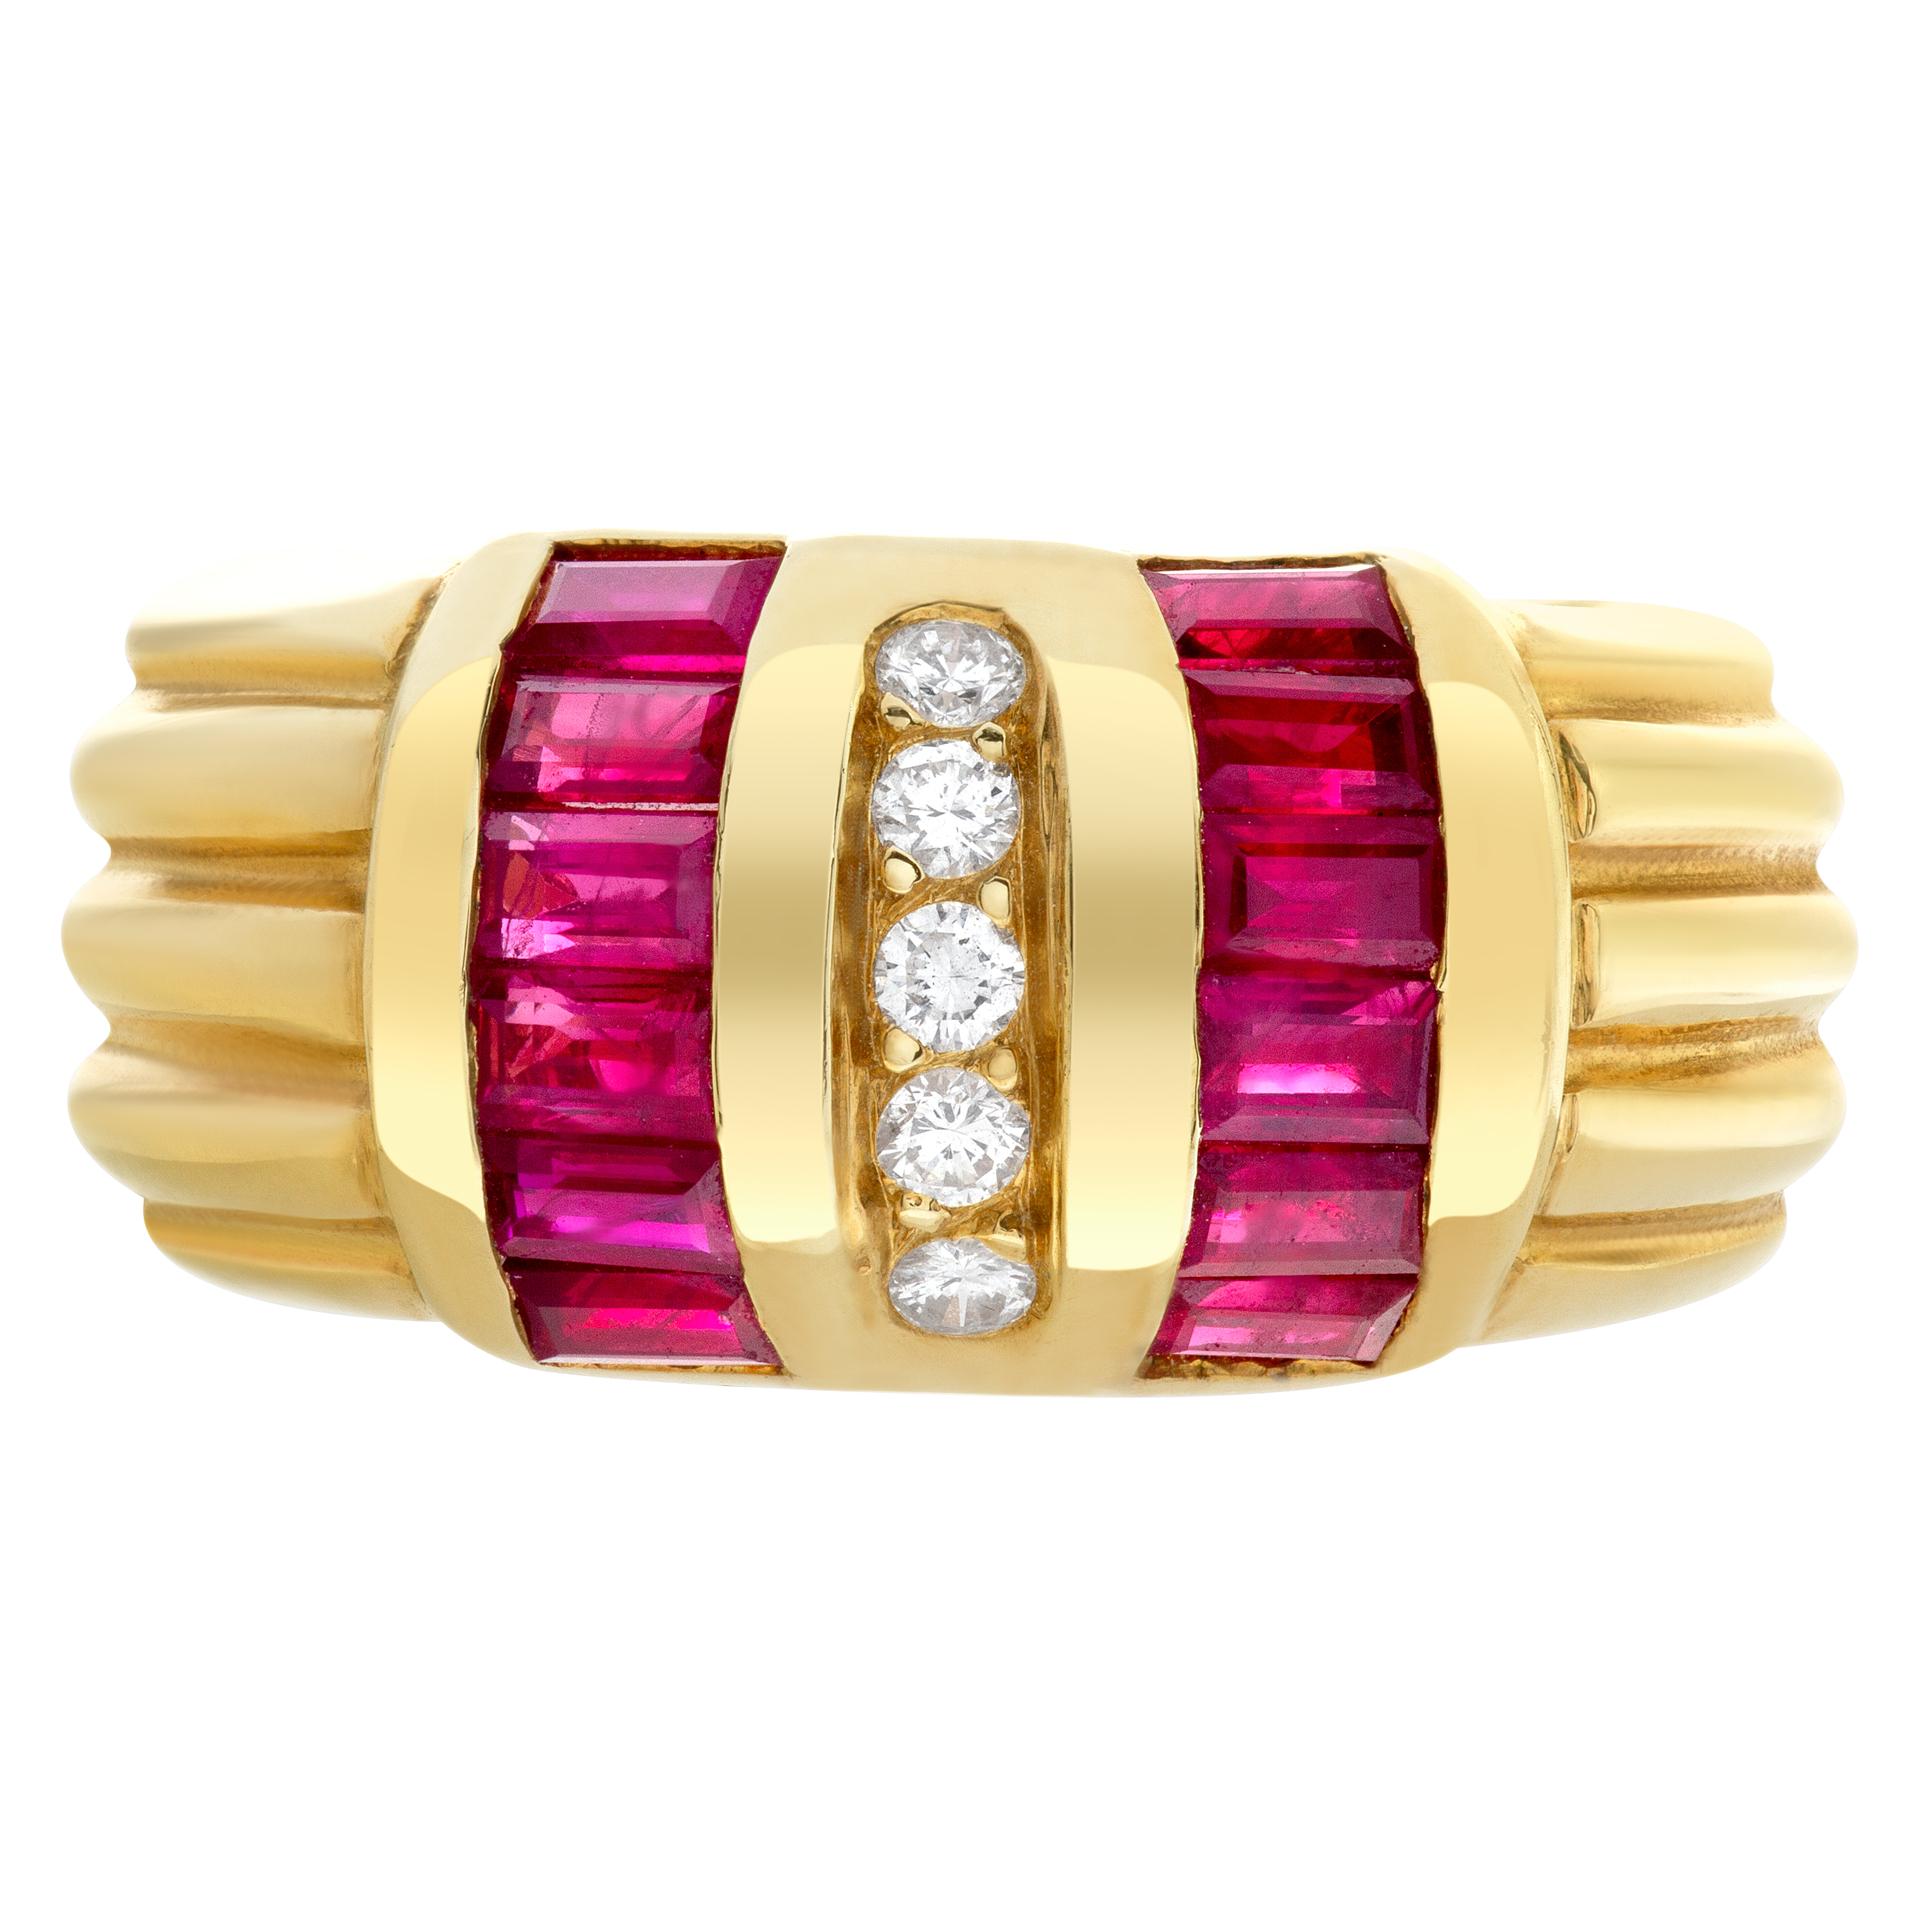 Ruby and Diamond set in 18k yellow gold ring. Approximately 1 carat calibrated retangular ruby & 0.15 carat full cut round brilliant diamonds. Diamond estimate: G-H color, VS clarity. Size 5.5.

This Diamond/Ruby ring is currently size 5.5 and some